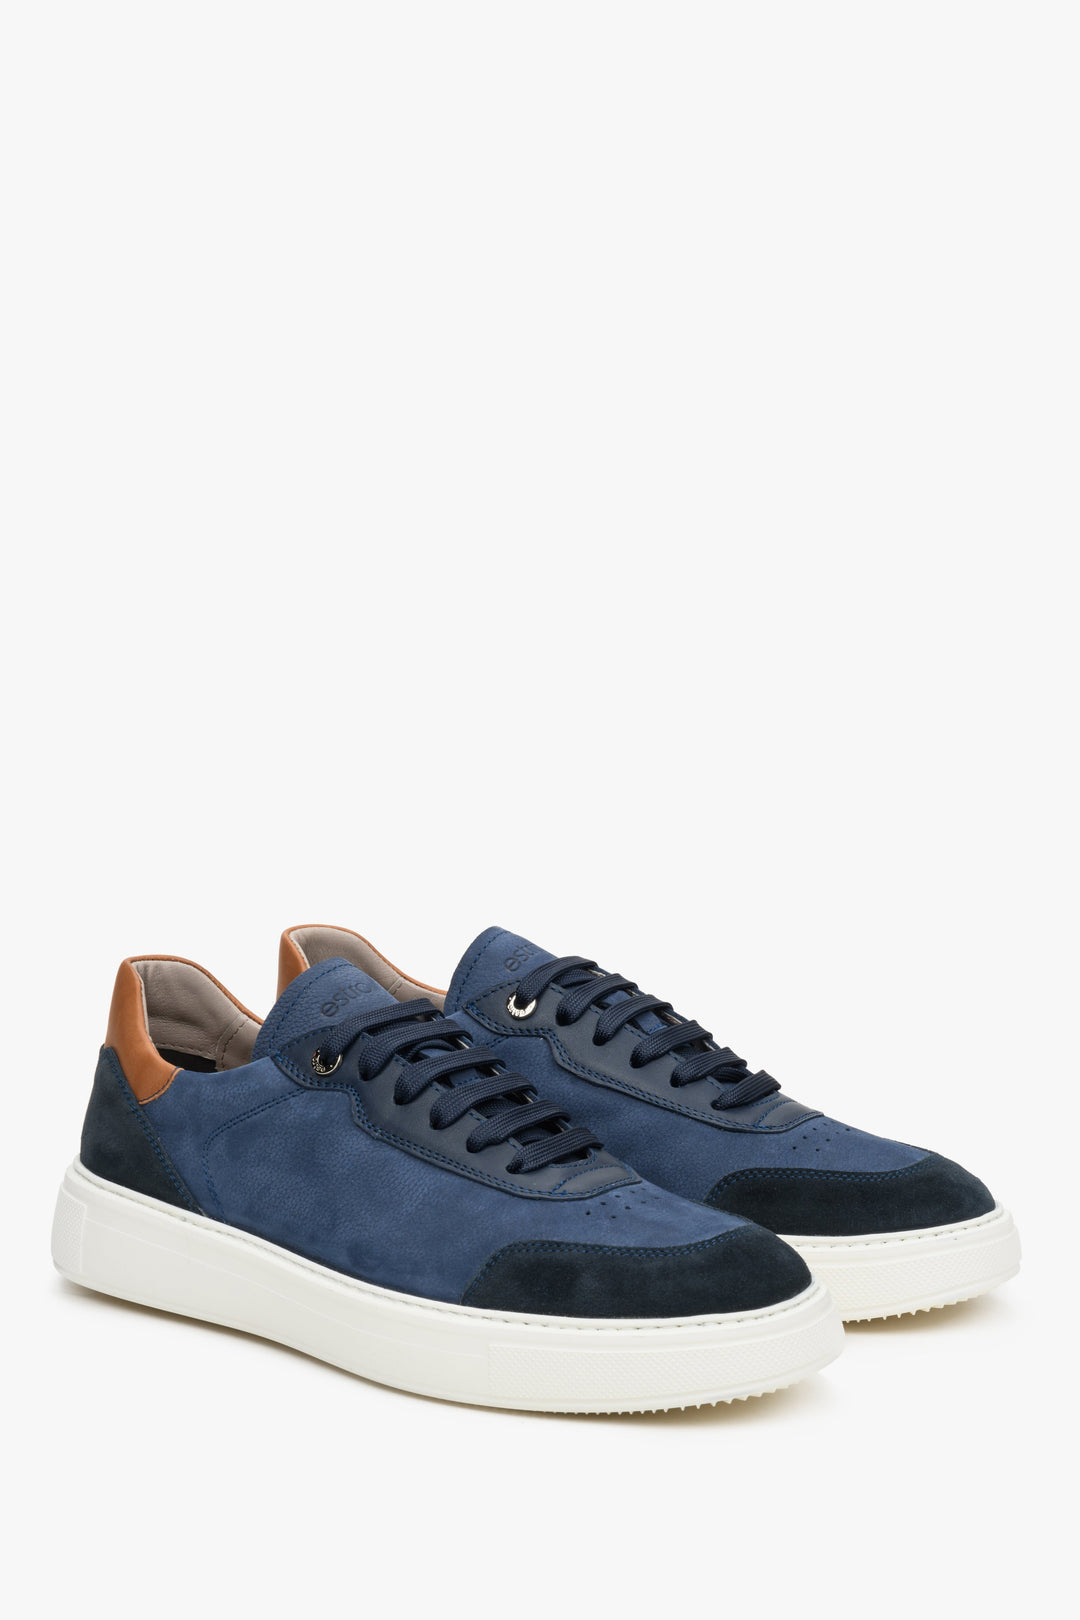 Men's blue-brown and white nubuck and natural leather spring Estro sneakers.